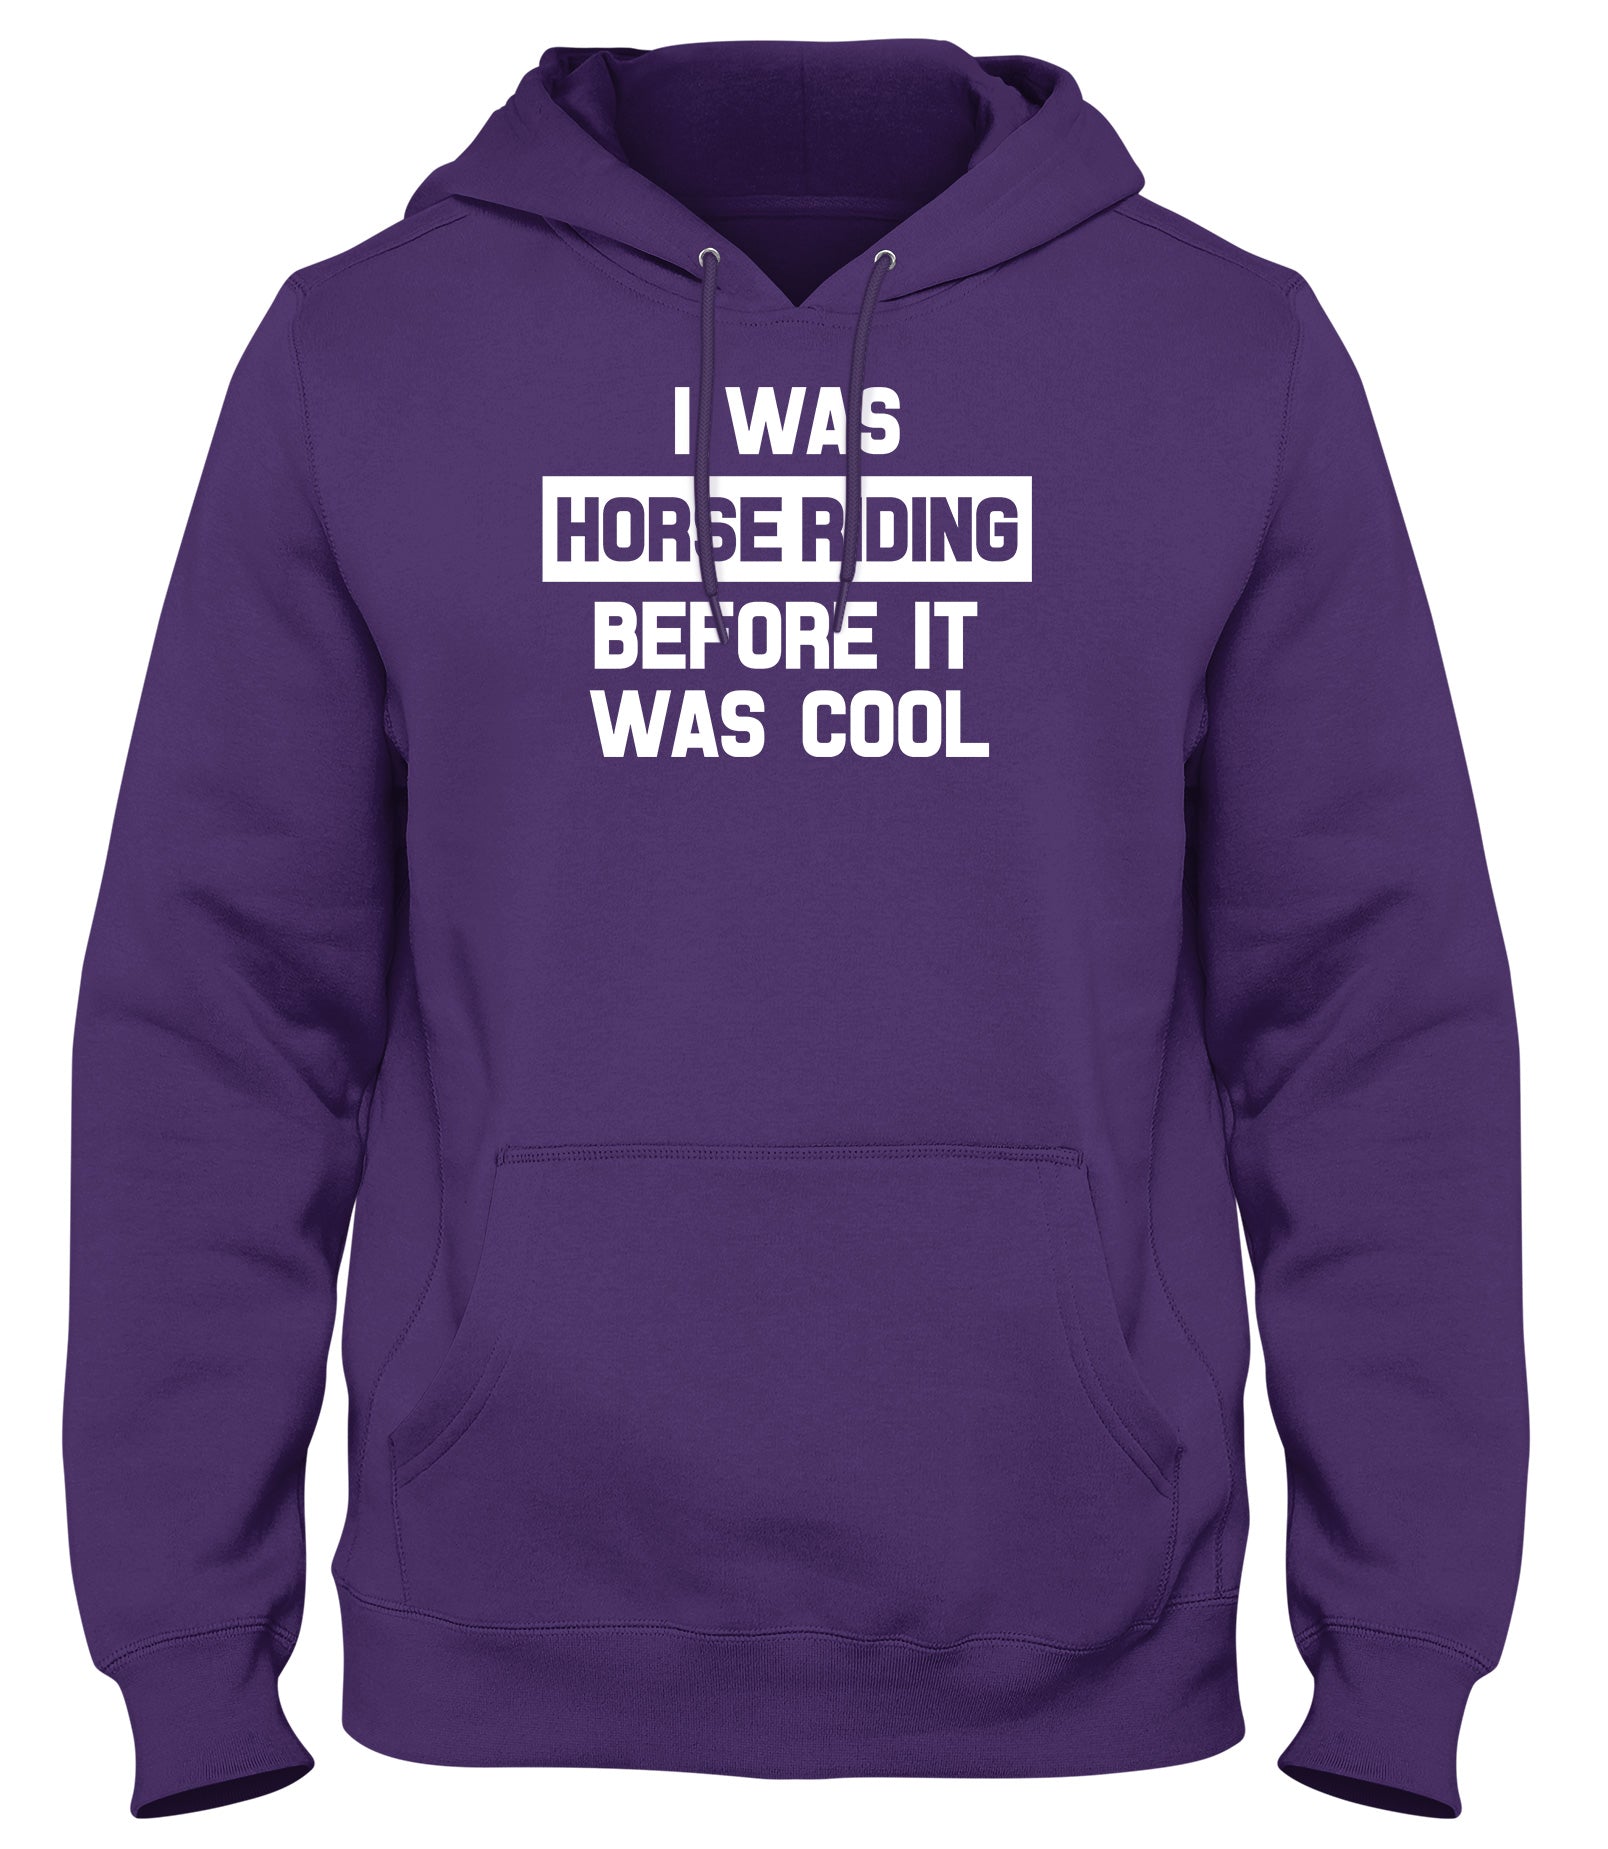 I WAS HORSE RIDING BEFORE IT WAS COOL WOMENS LADIES MENS UNISEX HOODIE